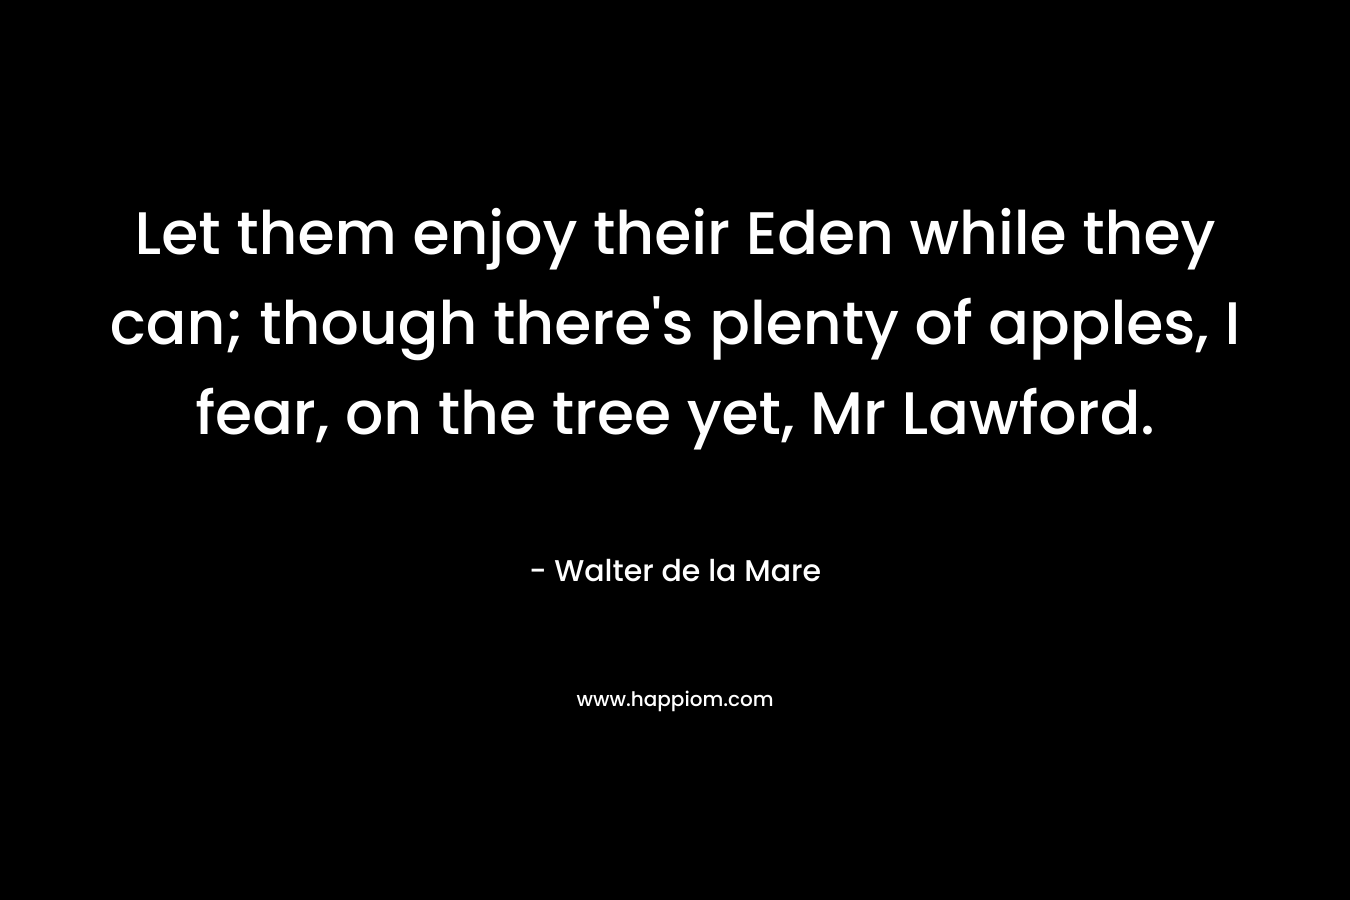 Let them enjoy their Eden while they can; though there's plenty of apples, I fear, on the tree yet, Mr Lawford.